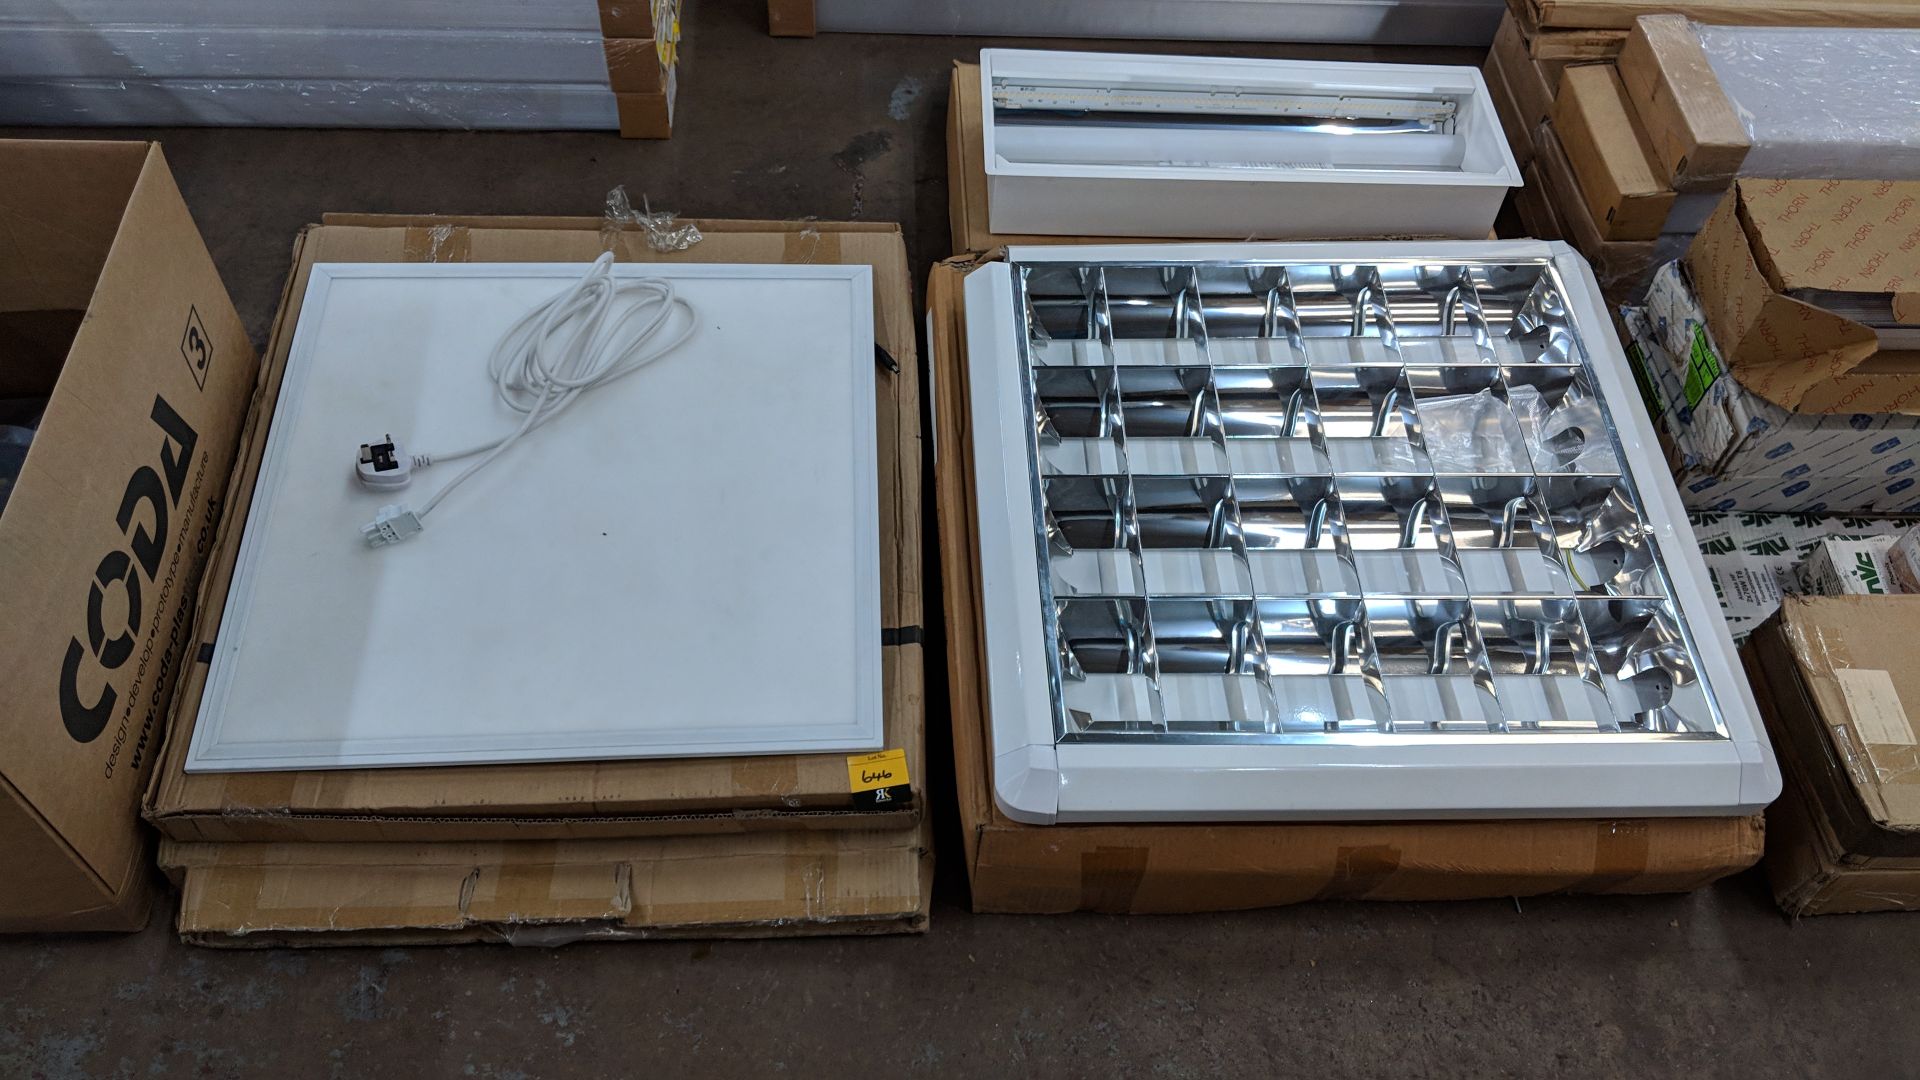 4 off assorted lighting units The vast majority of products in this auction appear new, complete and